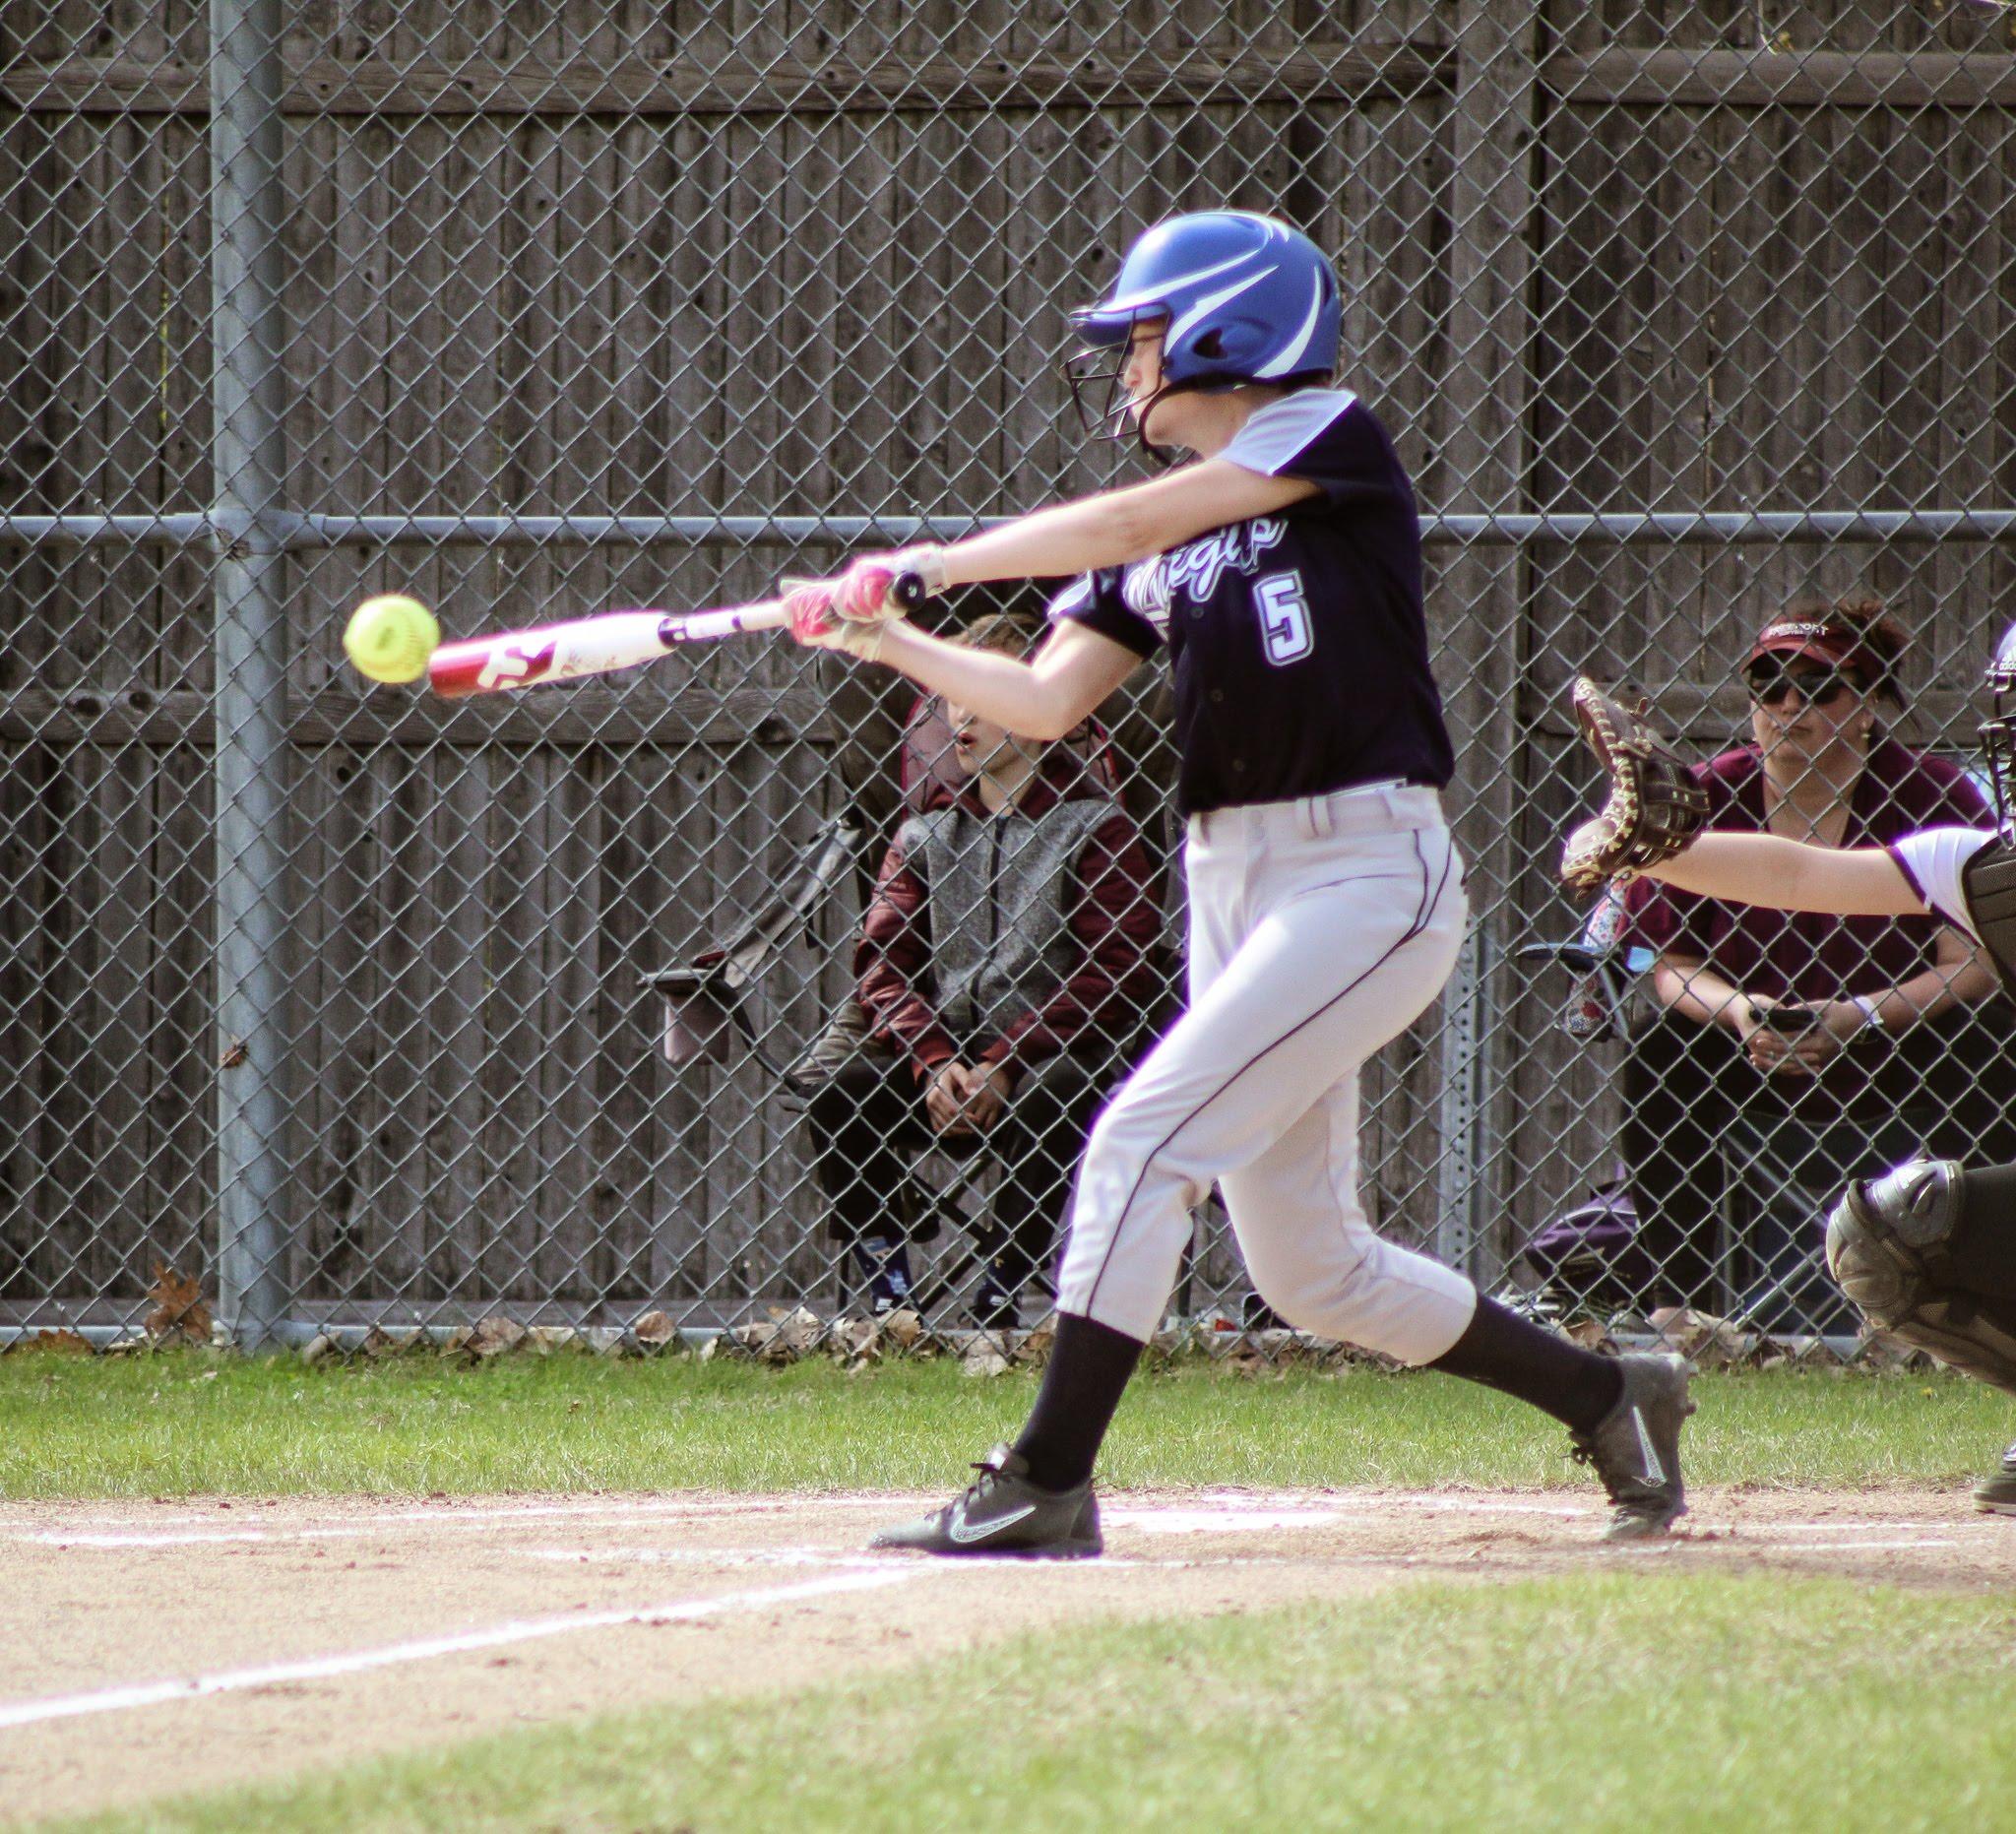 PRHS Girls Softball, 18-19, action photo of batter swinging and partial of catcher.